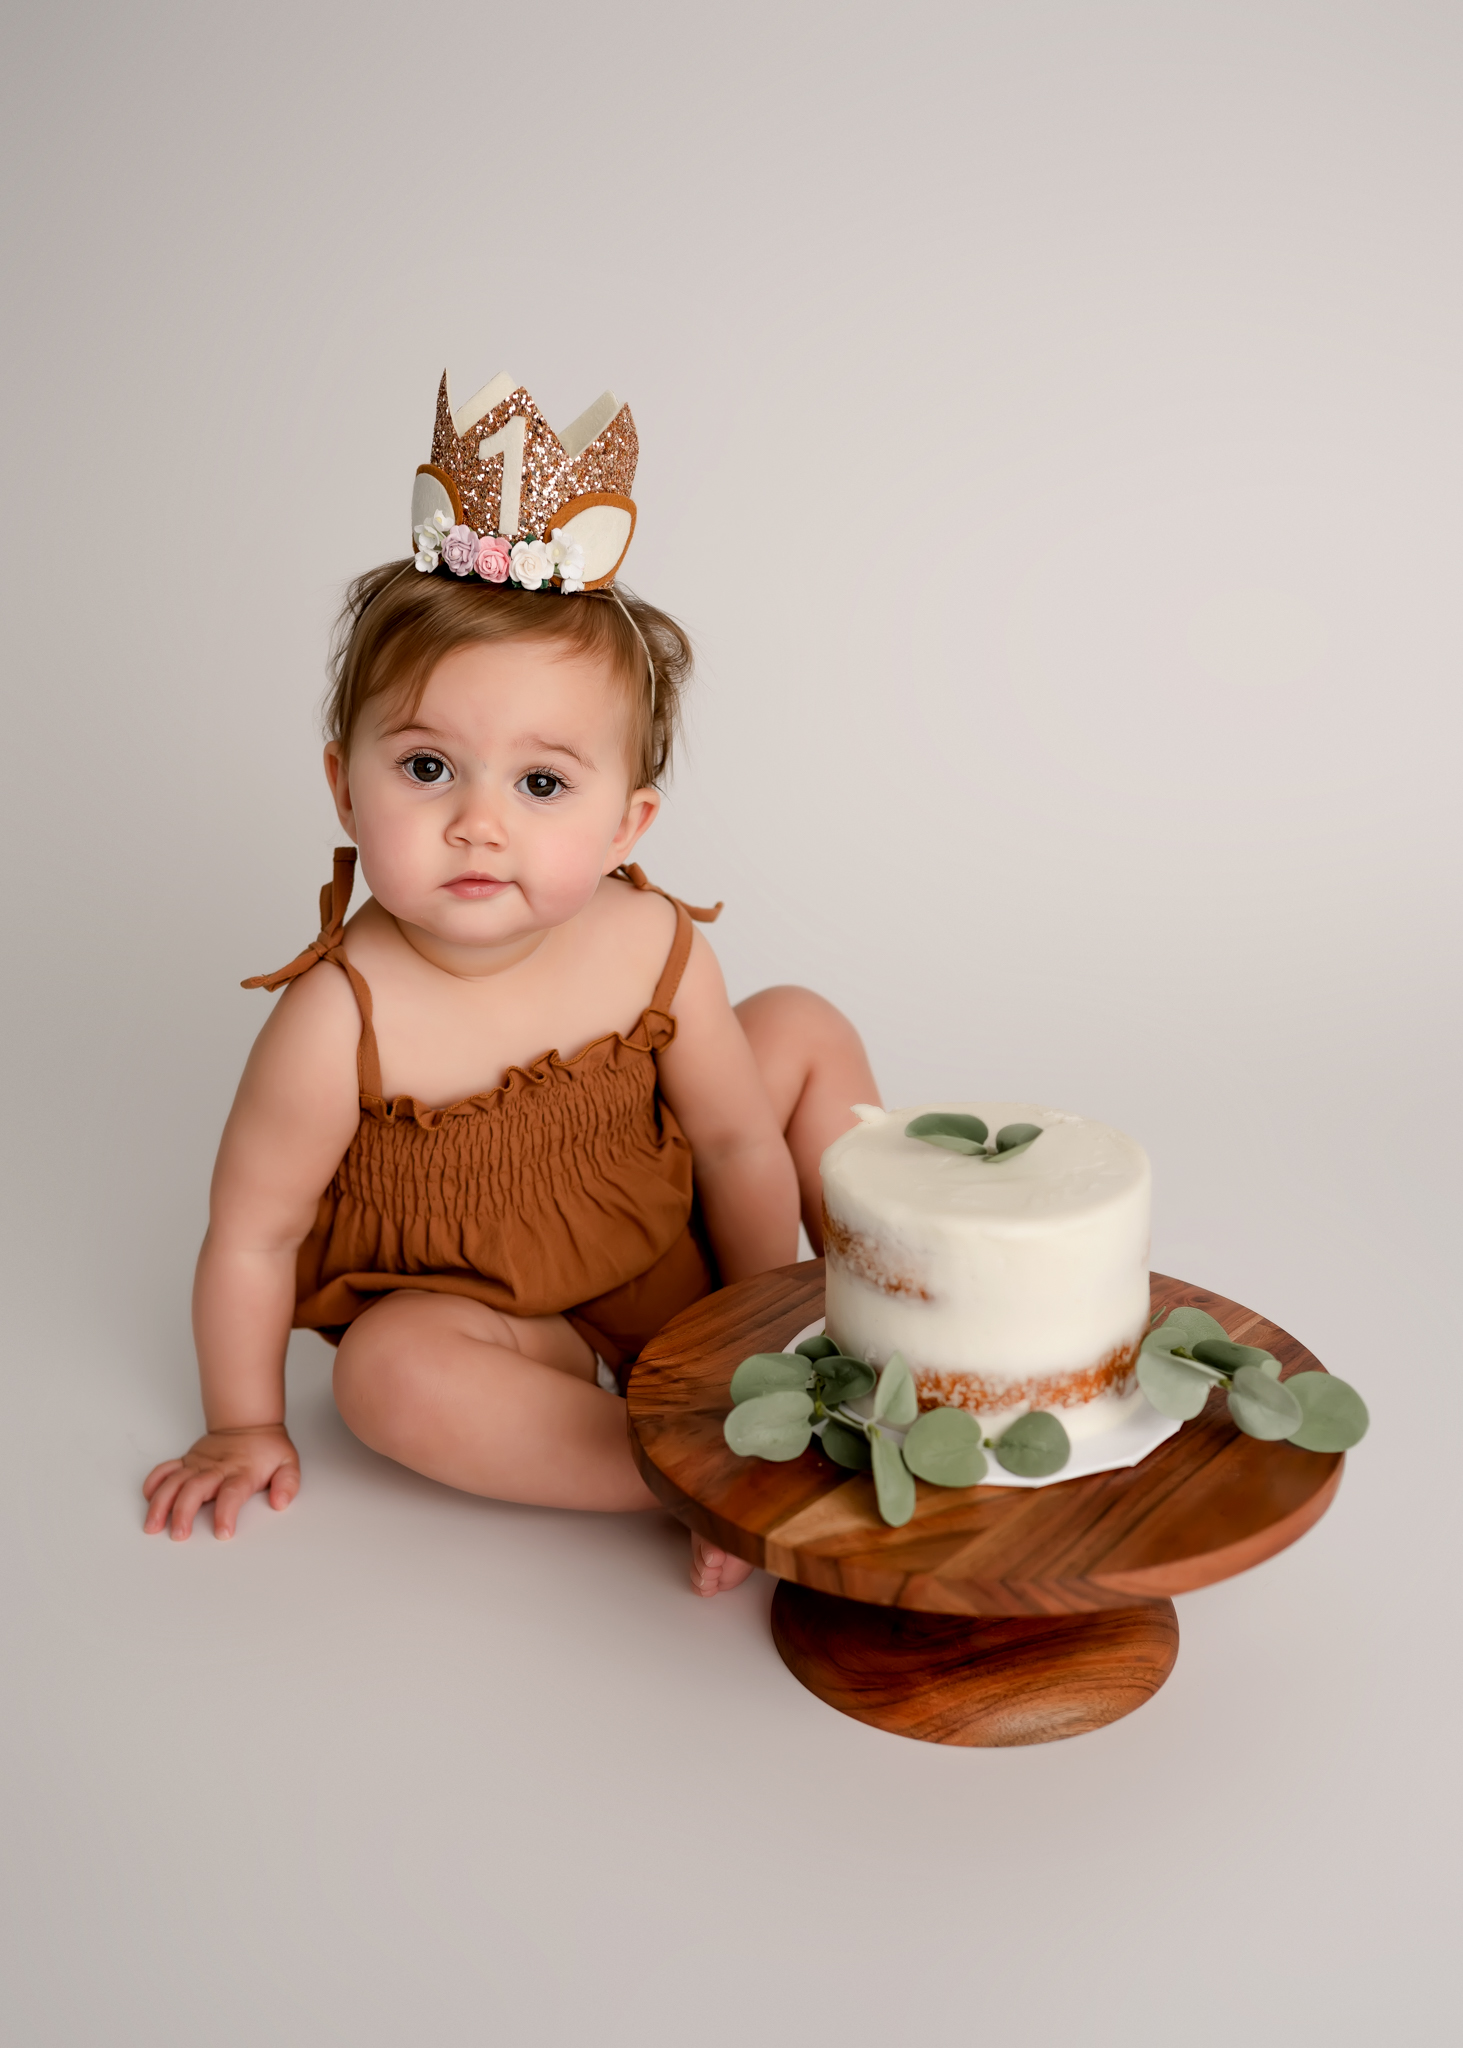 Girl with crown sits behind cake on white background